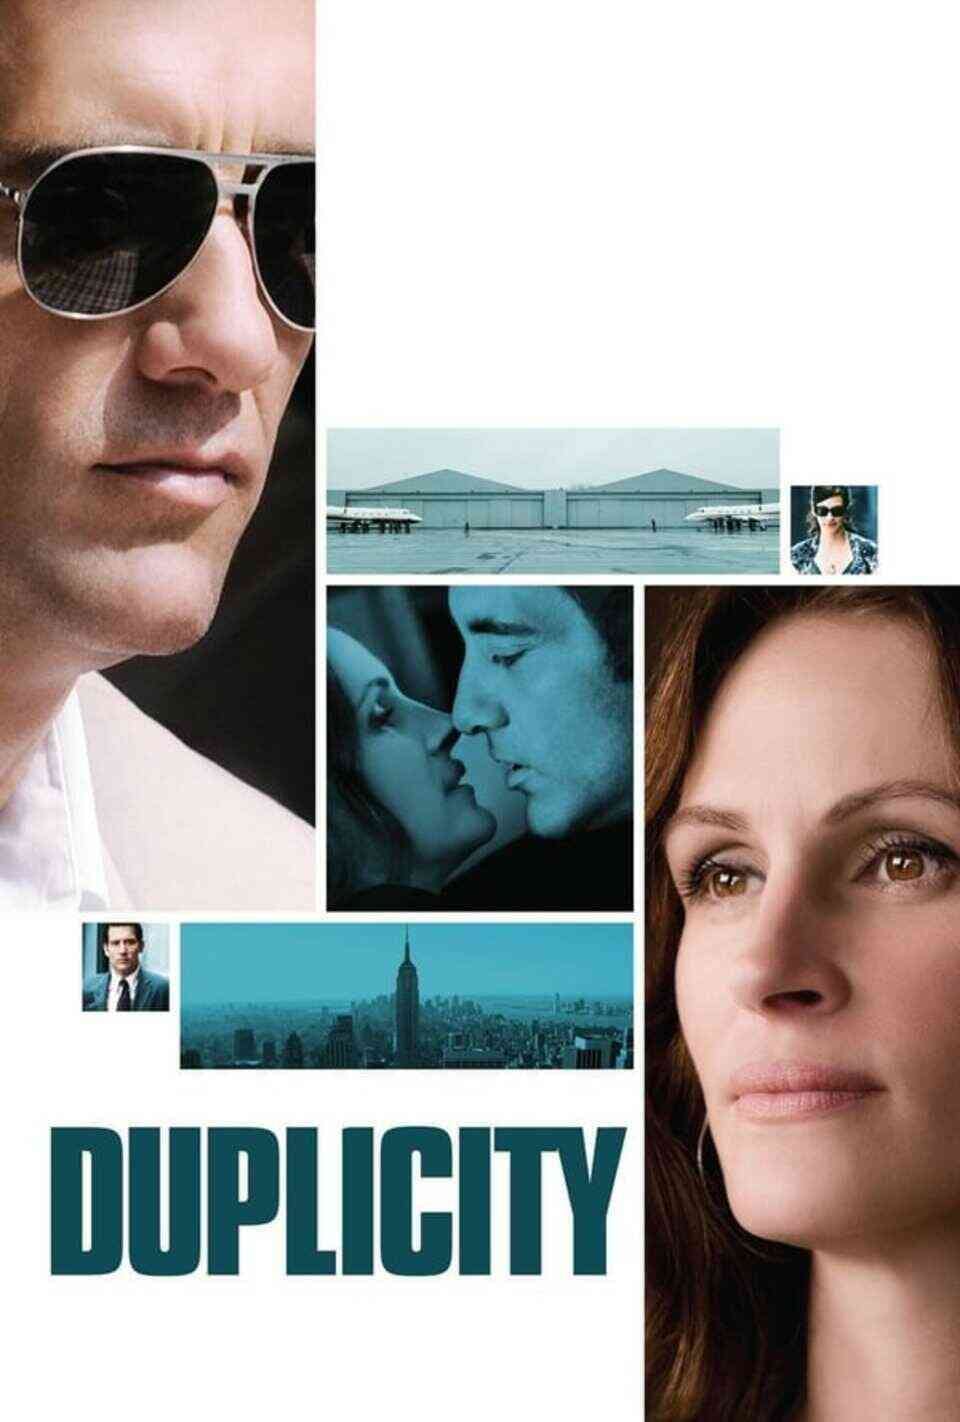 Read Duplicity screenplay (poster)